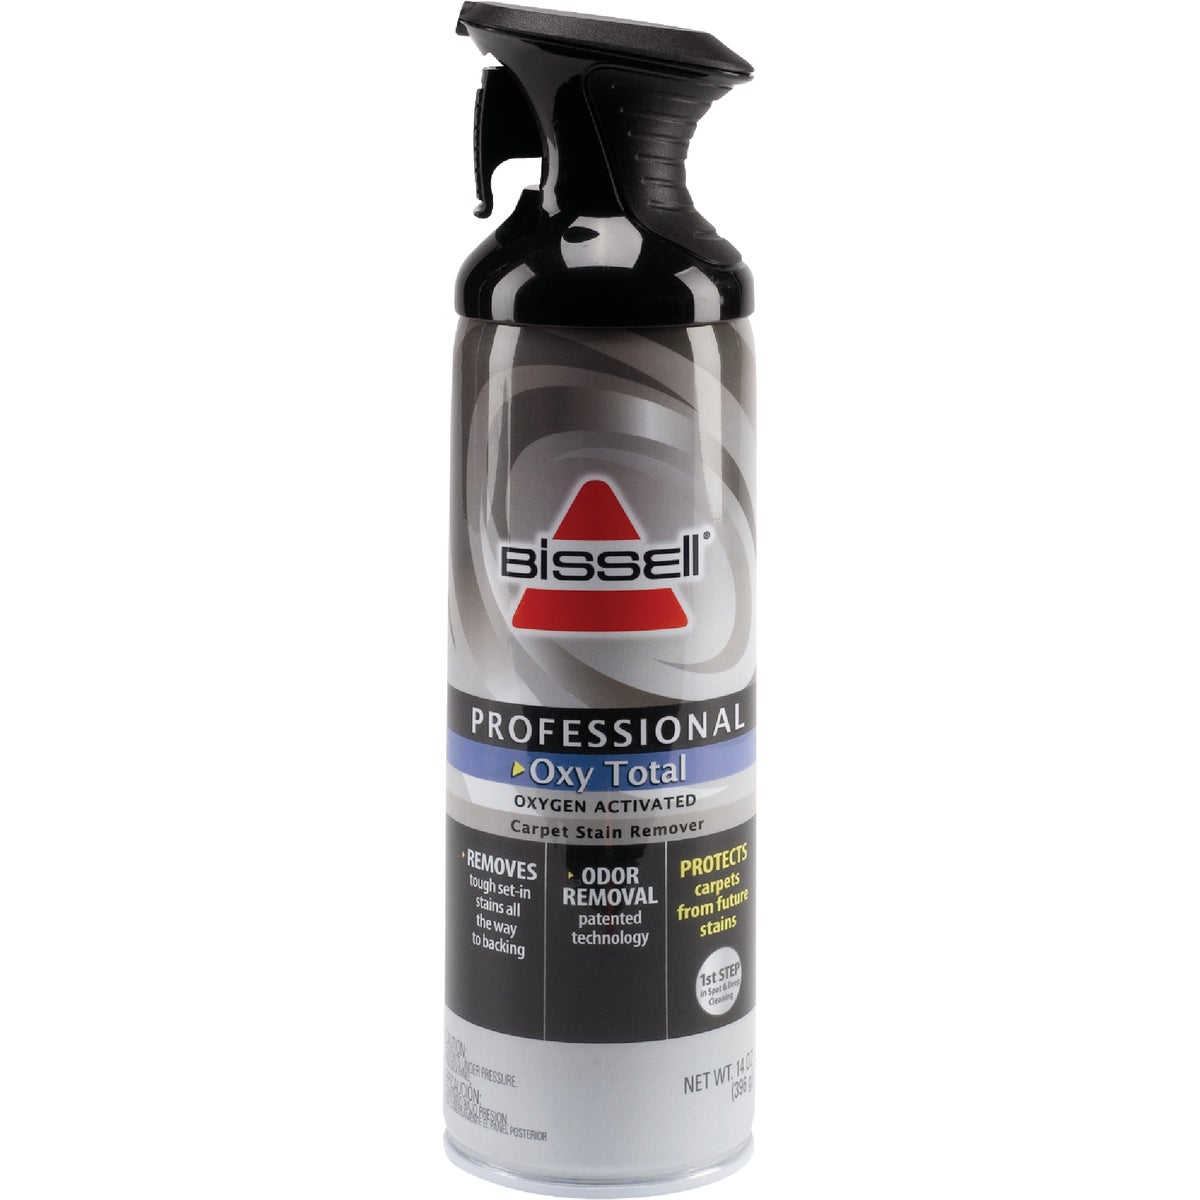 Bissell 14 Oz. Oxy Total Carpet Cleaner